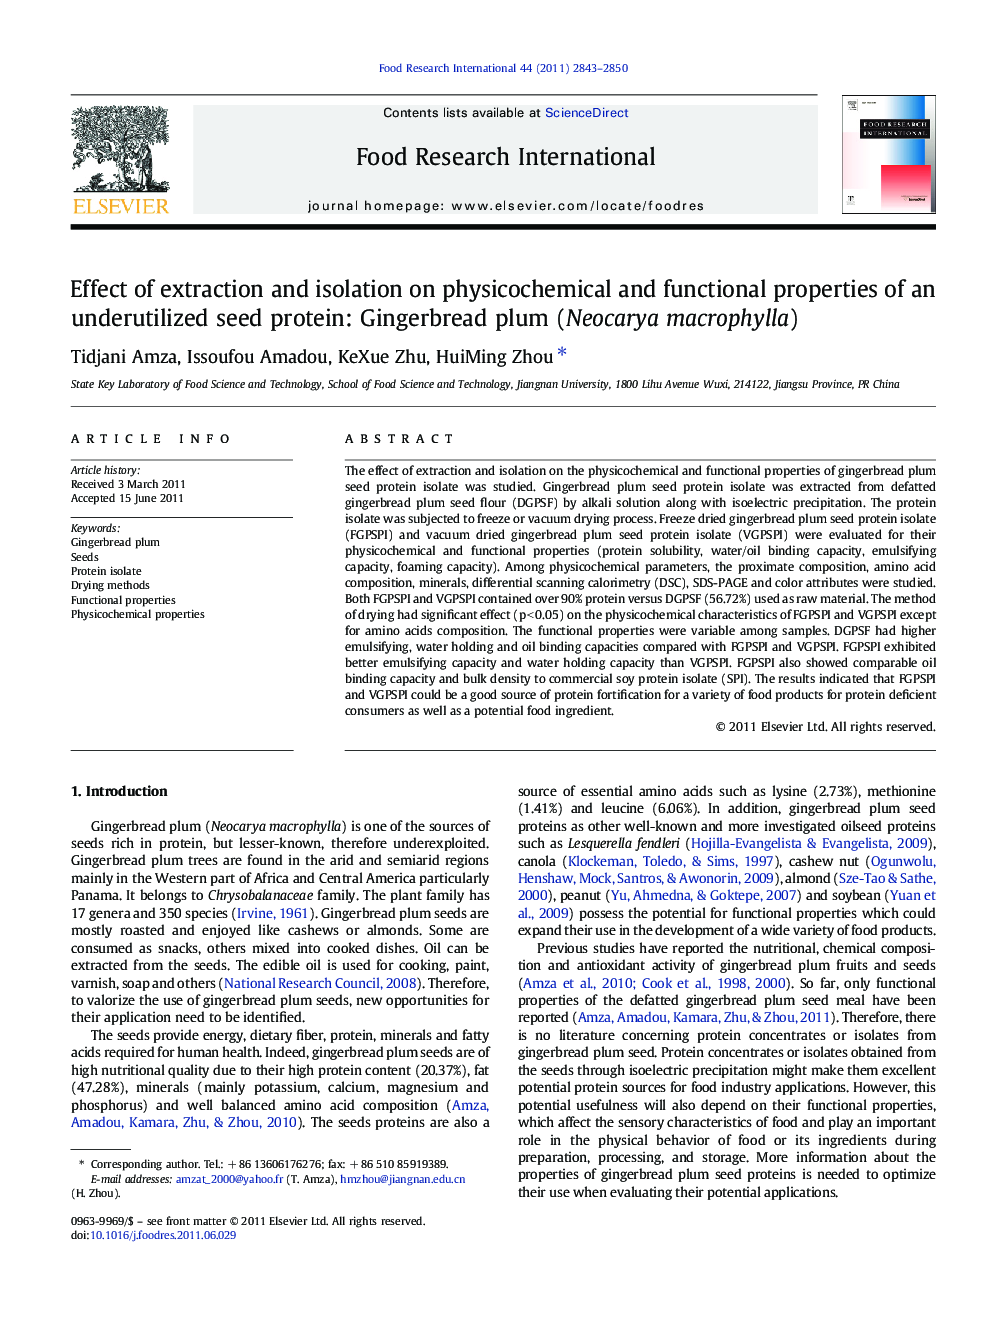 Effect of extraction and isolation on physicochemical and functional properties of an underutilized seed protein: Gingerbread plum (Neocarya macrophylla)